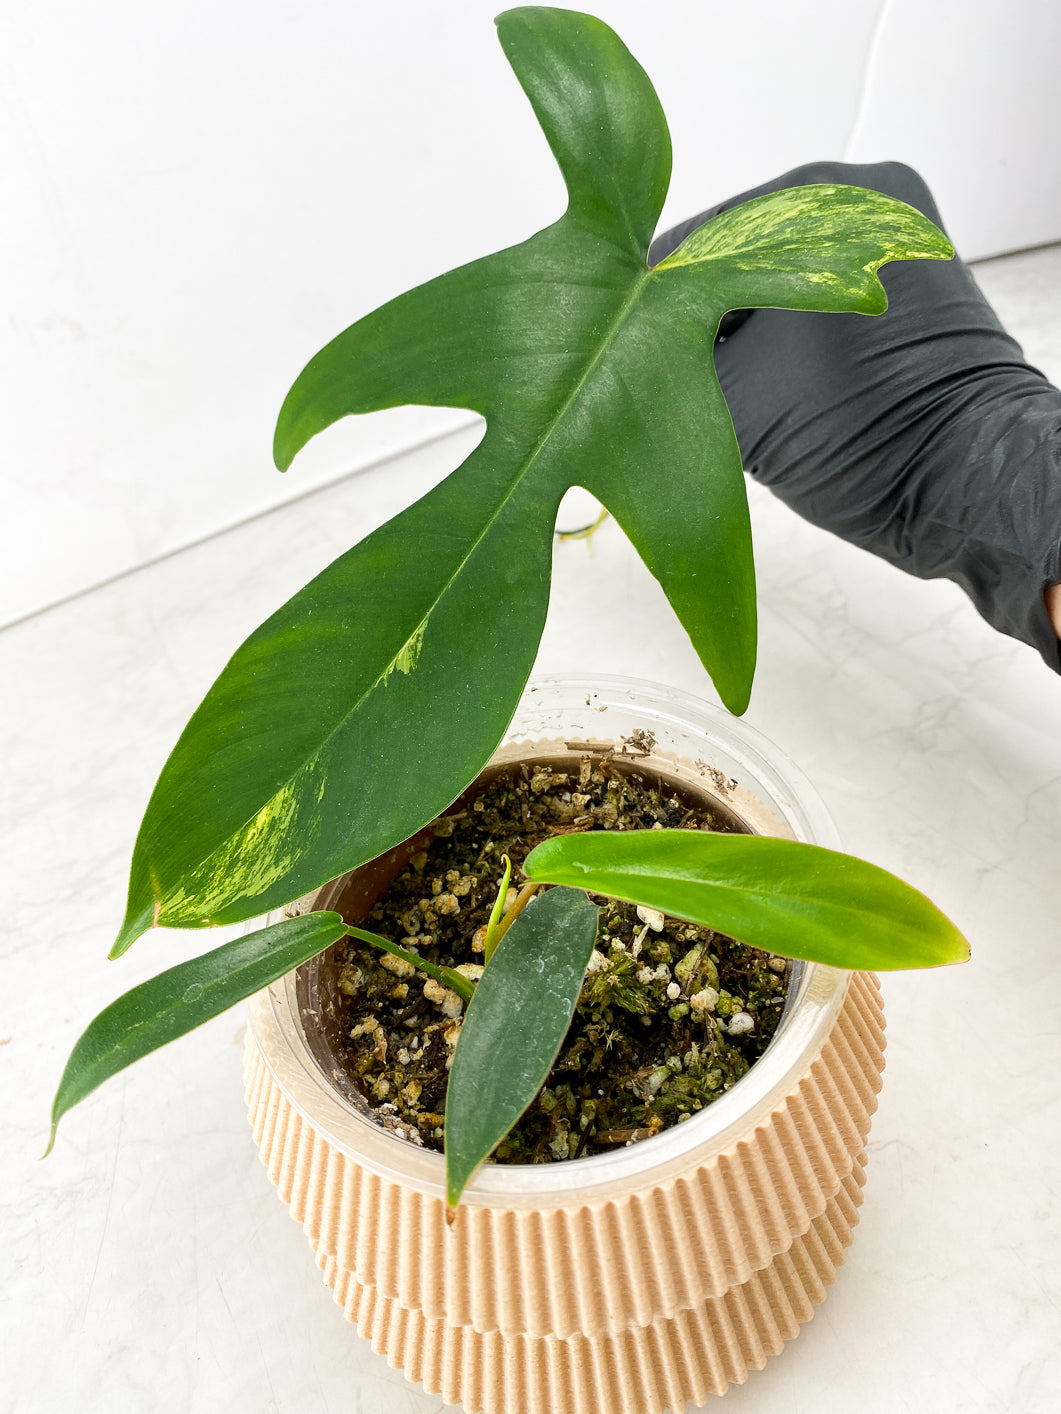 Combo Deal! Philodendron Florida Beauty and Philodendron Joepii